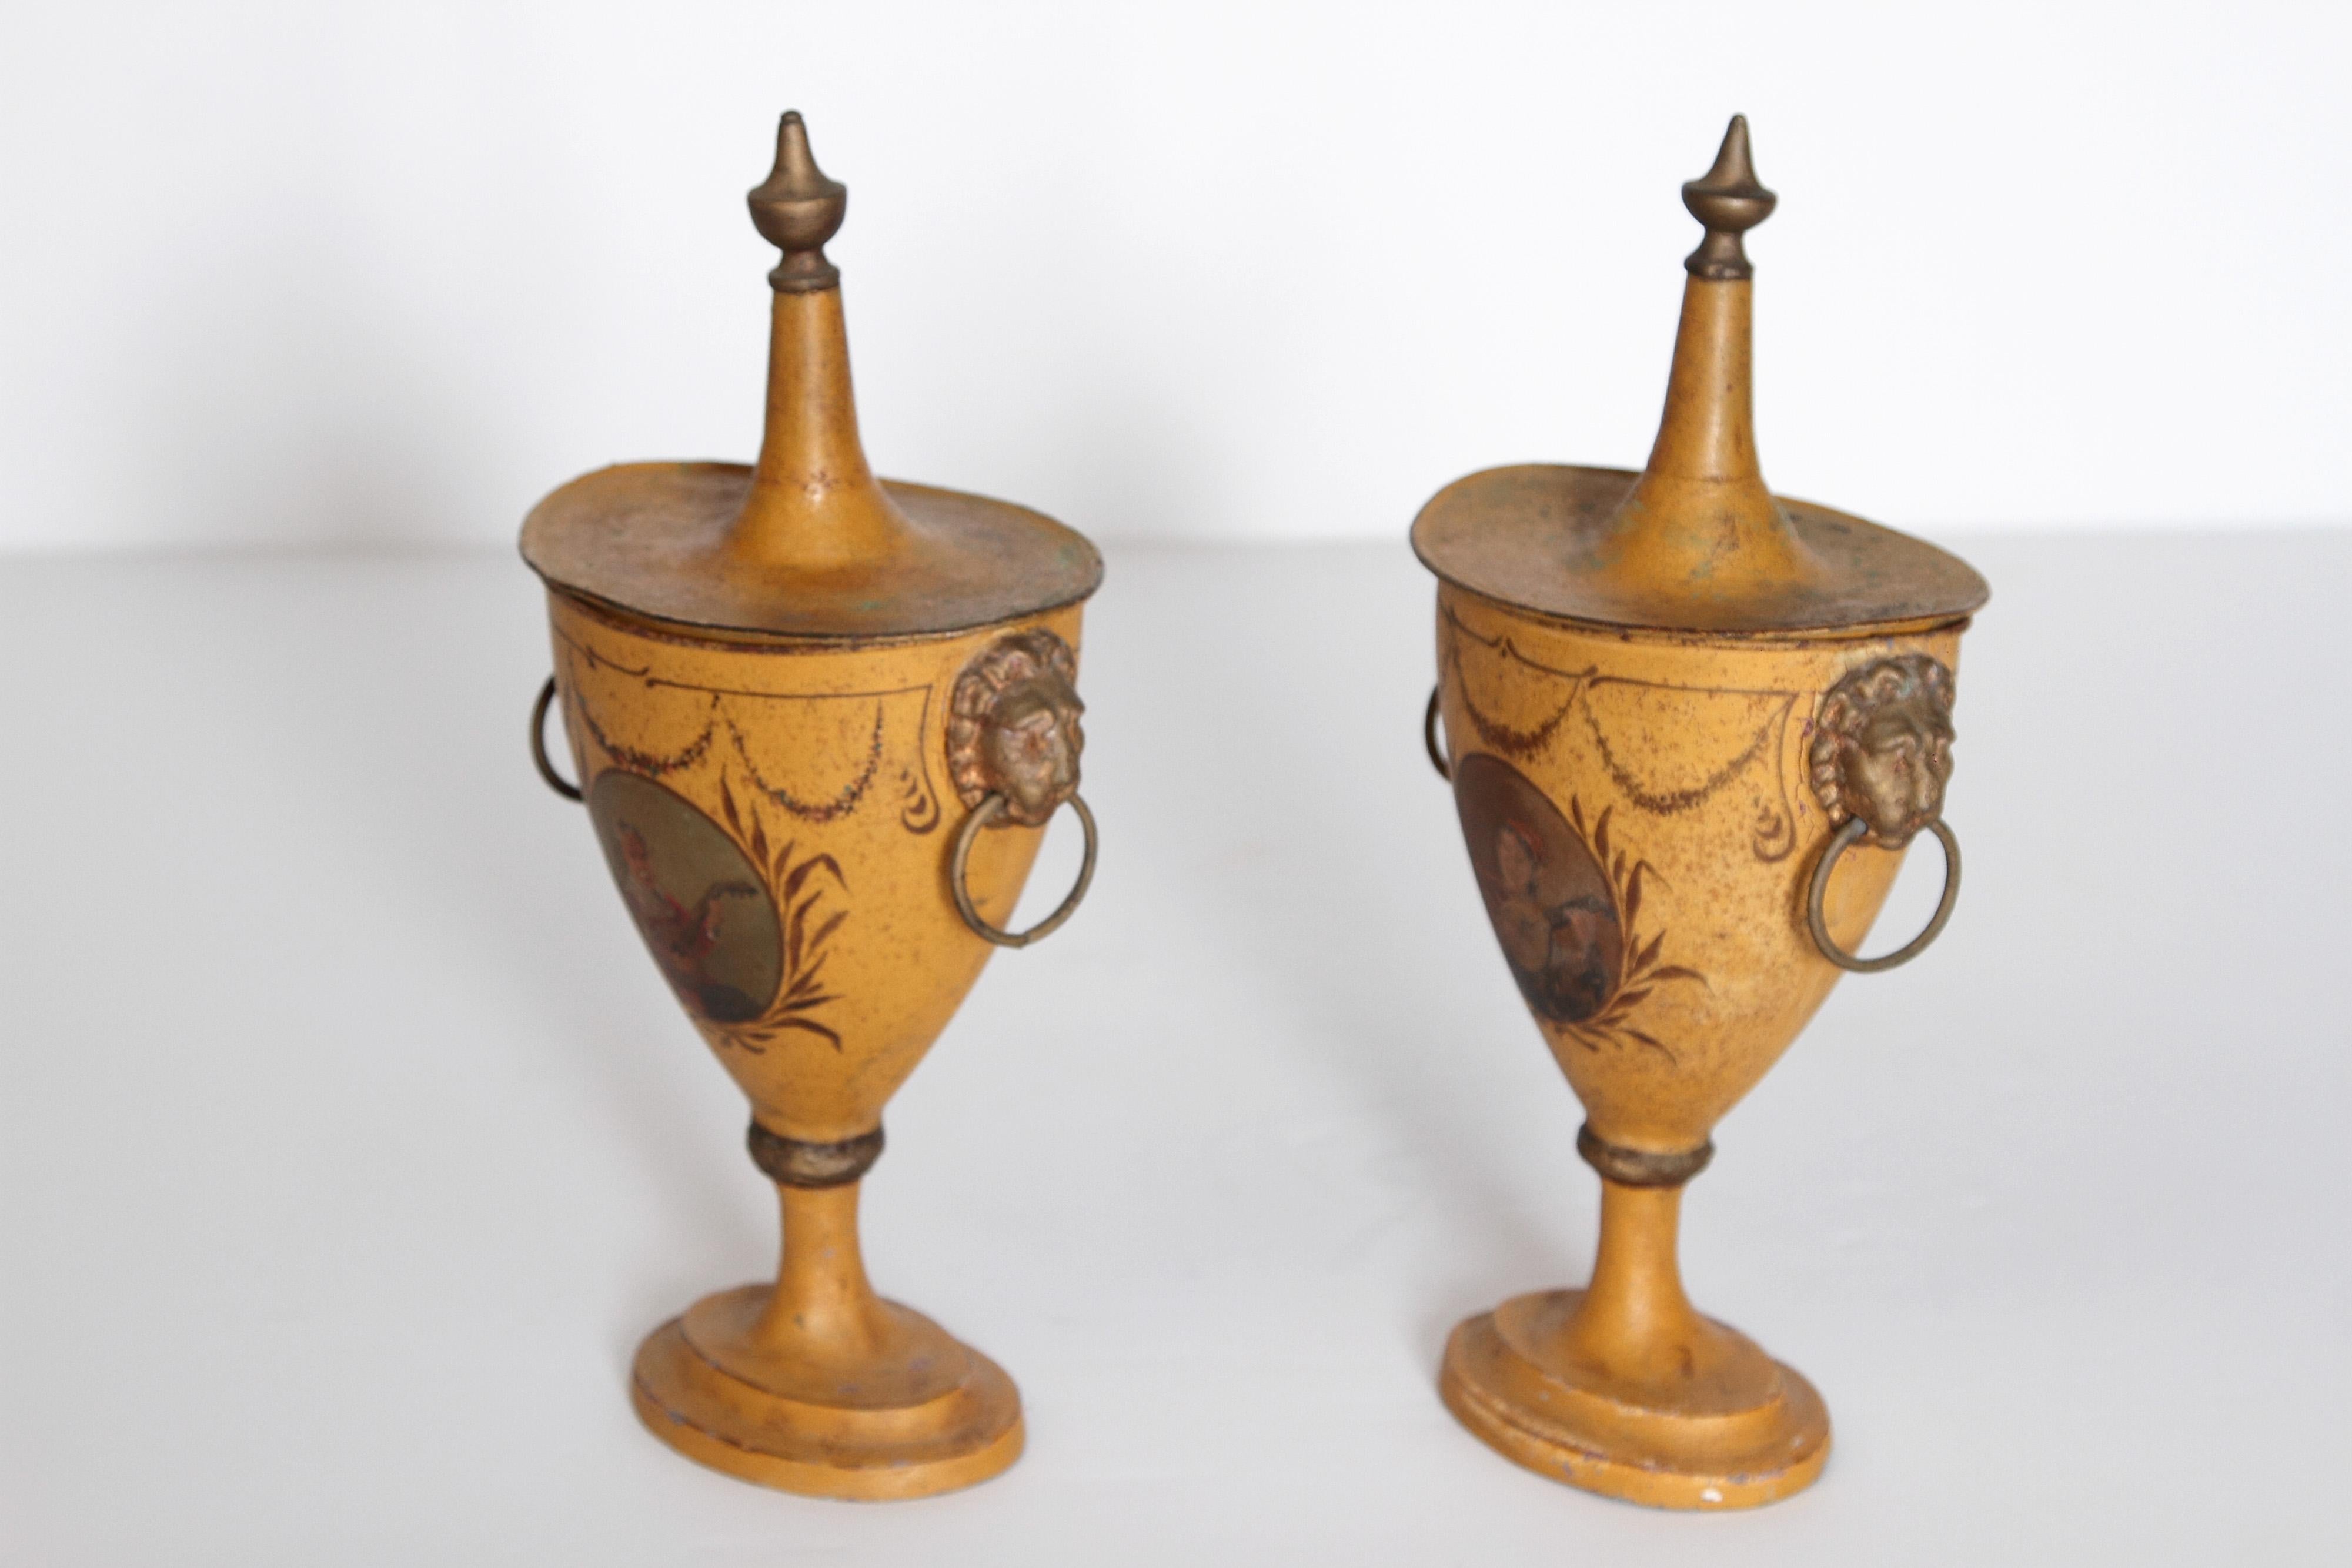 A pair of Regency tole painted chestnut urns with lids. Each tapering form is decorated with images of figures with instruments after the style of the Old Dutch Masters. Reserved on a mustard yellow ground with floral swags. On the sides are lion